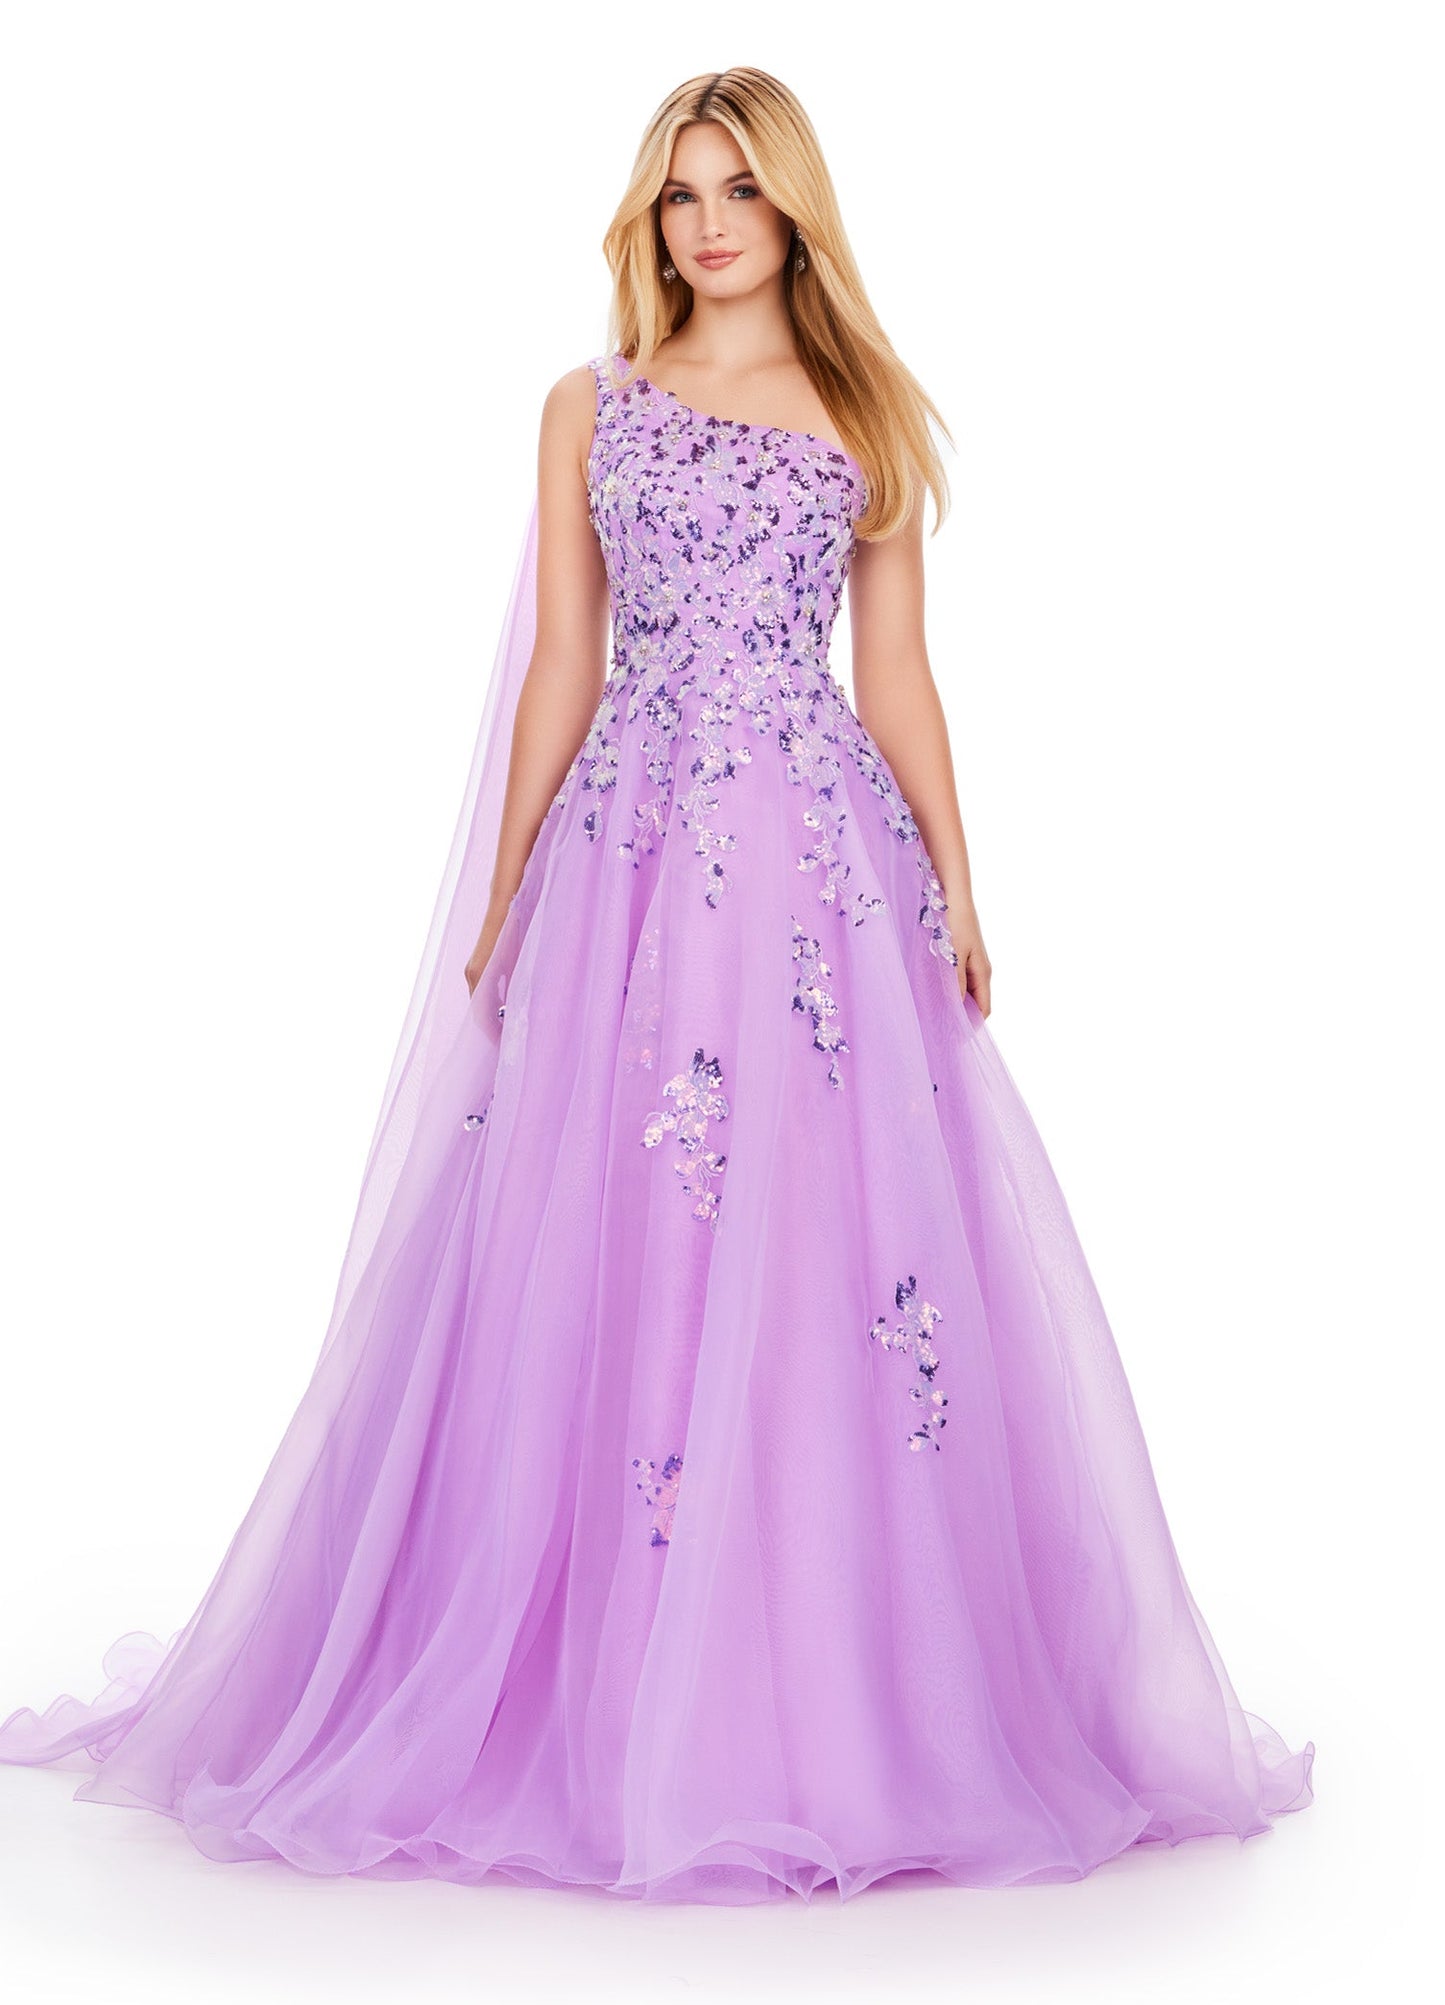 This Ashley Lauren 11573 Long Prom Dress exudes elegance with its one shoulder design and sequin applique. Crafted from high-quality organza, this gown will make you stand out at any formal event or pageant. Its classic silhouette and sparkling details are perfect for making a statement. This romantic one shoulder organza ball gown features intricate sequin applique. The look is complete with an open back and a one shoulder cape.